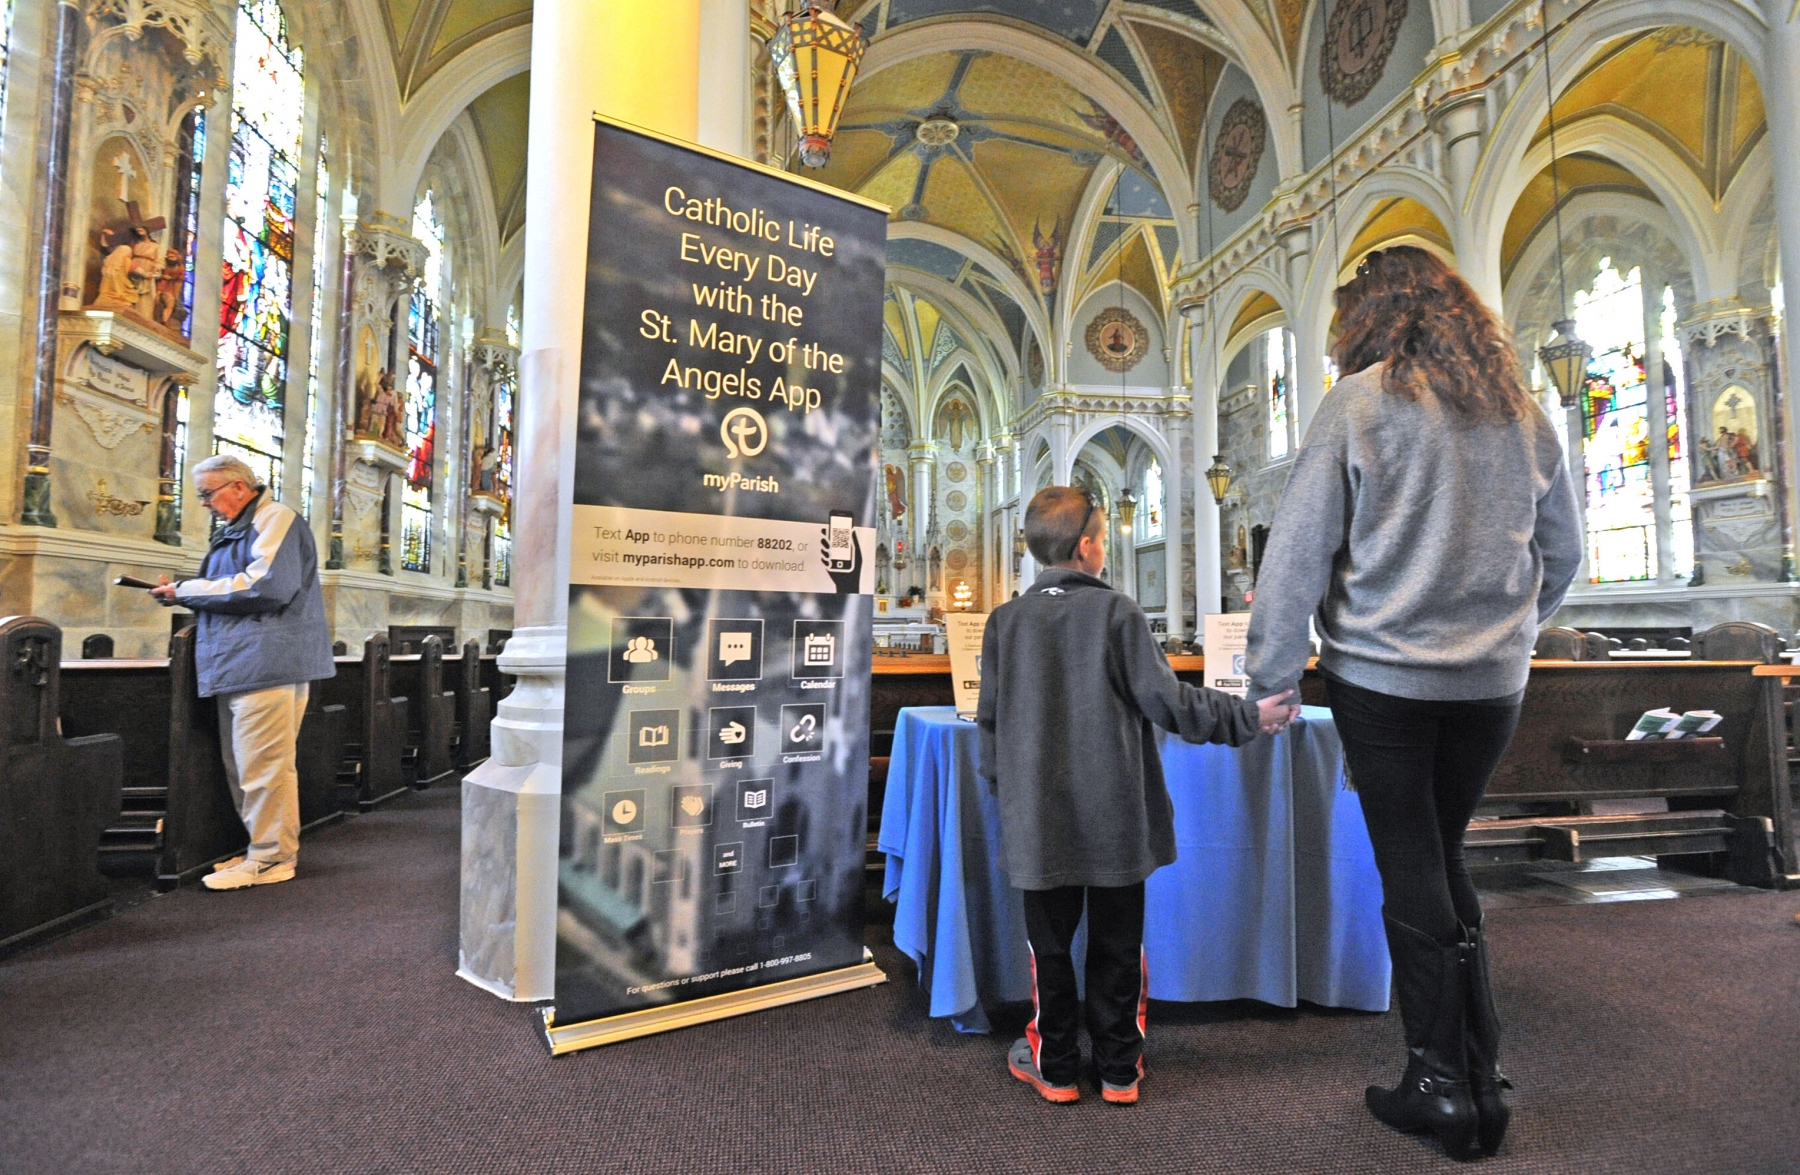 Area Catholics at St. Mary of the Angels Church, Olean, look over information on an app that parishioners can use to find Mass times, set confession appointments and reflect on readings. (Dan Cappellazzo/Staff Photographer)
